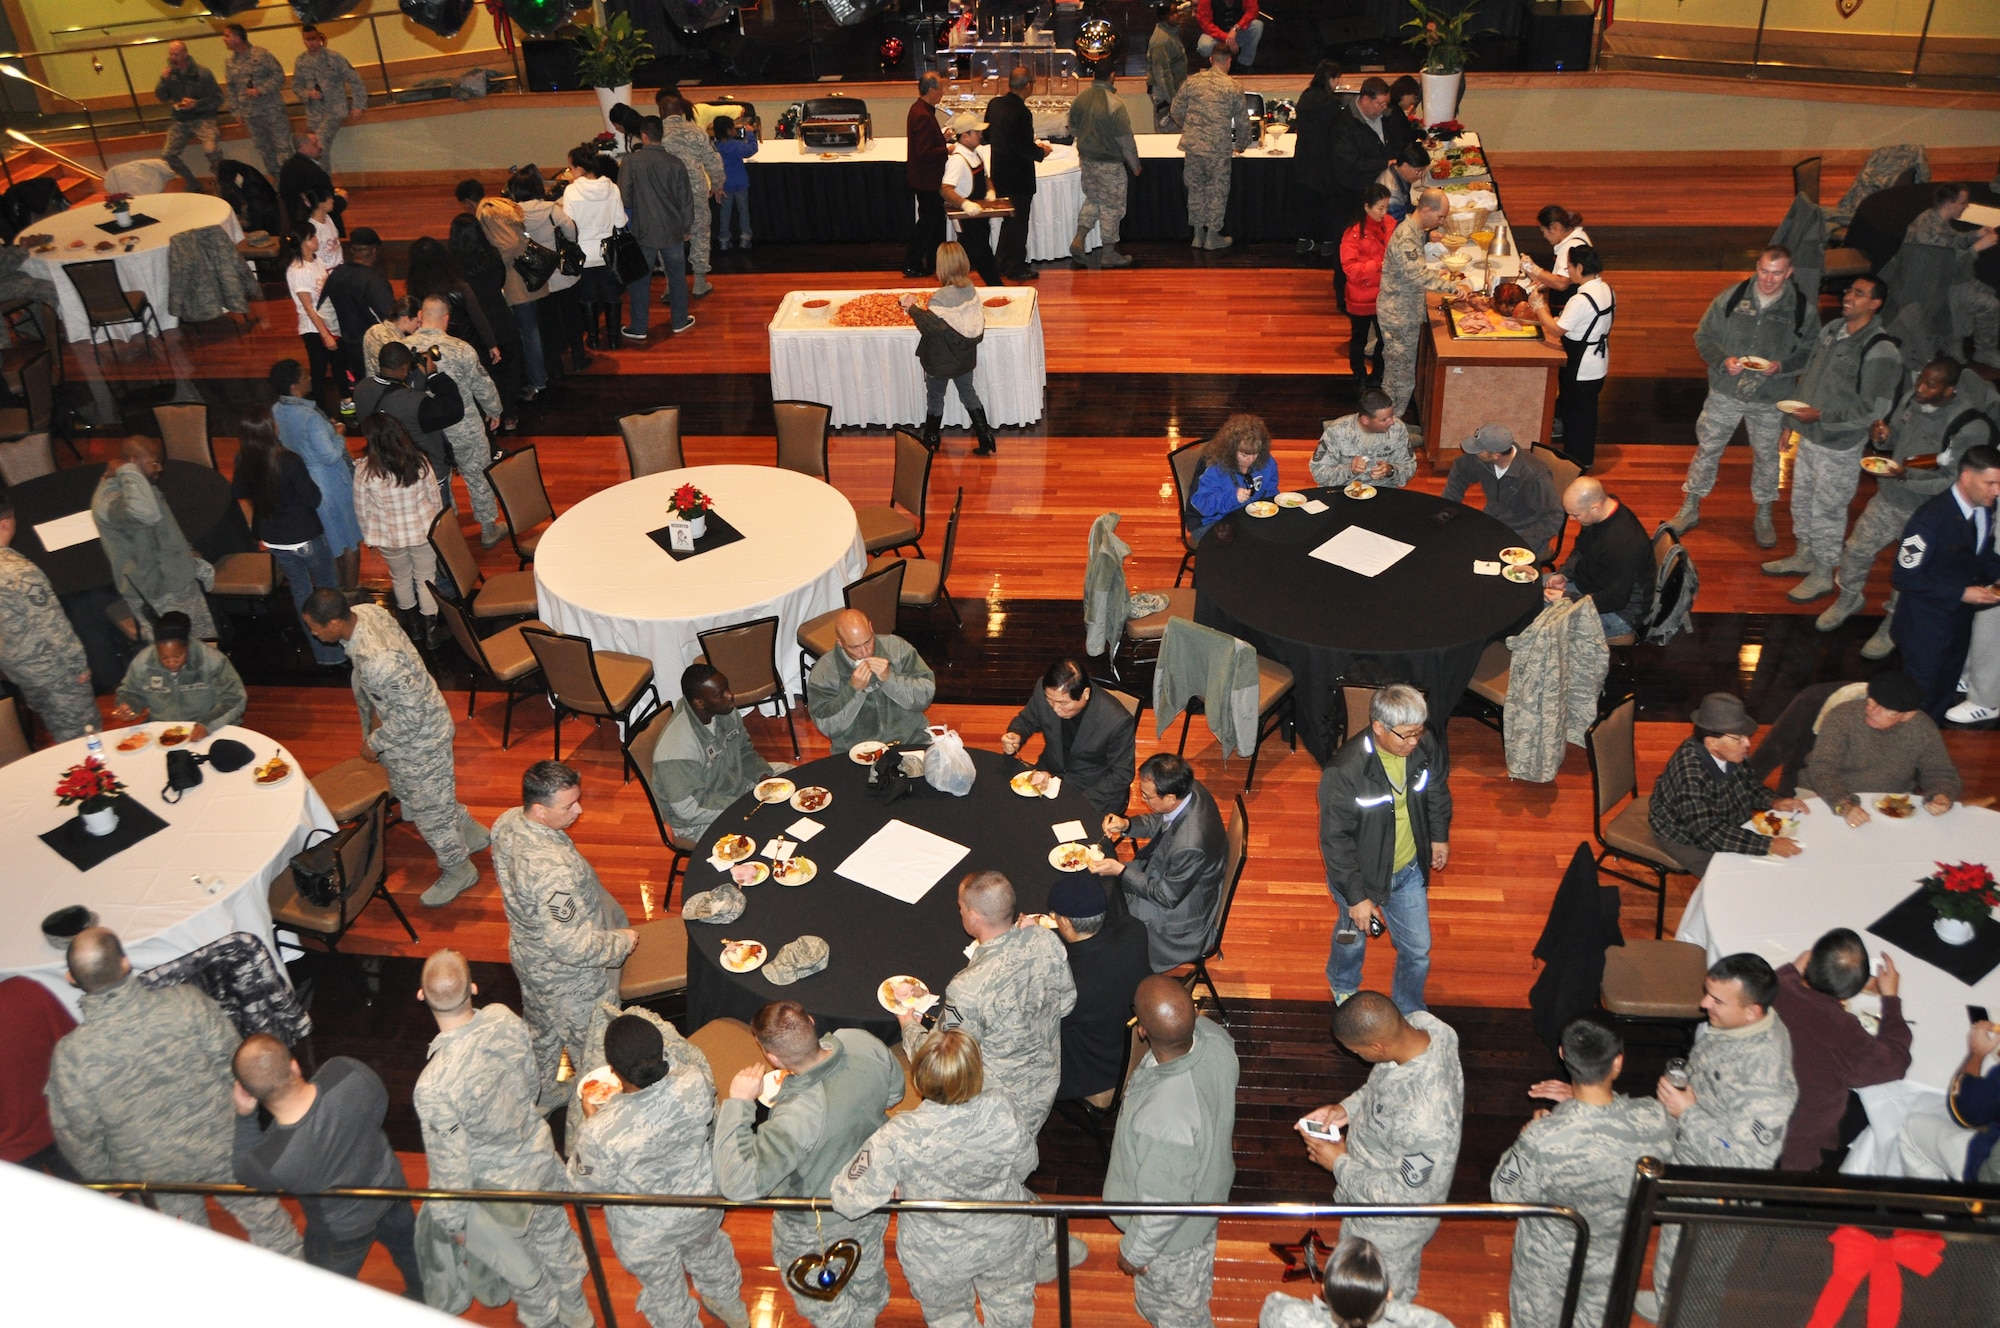 Members of Team Osan gather in the ballroom of the new enlisted club after the grand opening ceremony Nov. 30, 2012. The event began with a ribbon cutting ceremony, and featured live music, karaoke, games and giveaways. (U.S. Air Force photo/Senior Airman Kristina Overton)